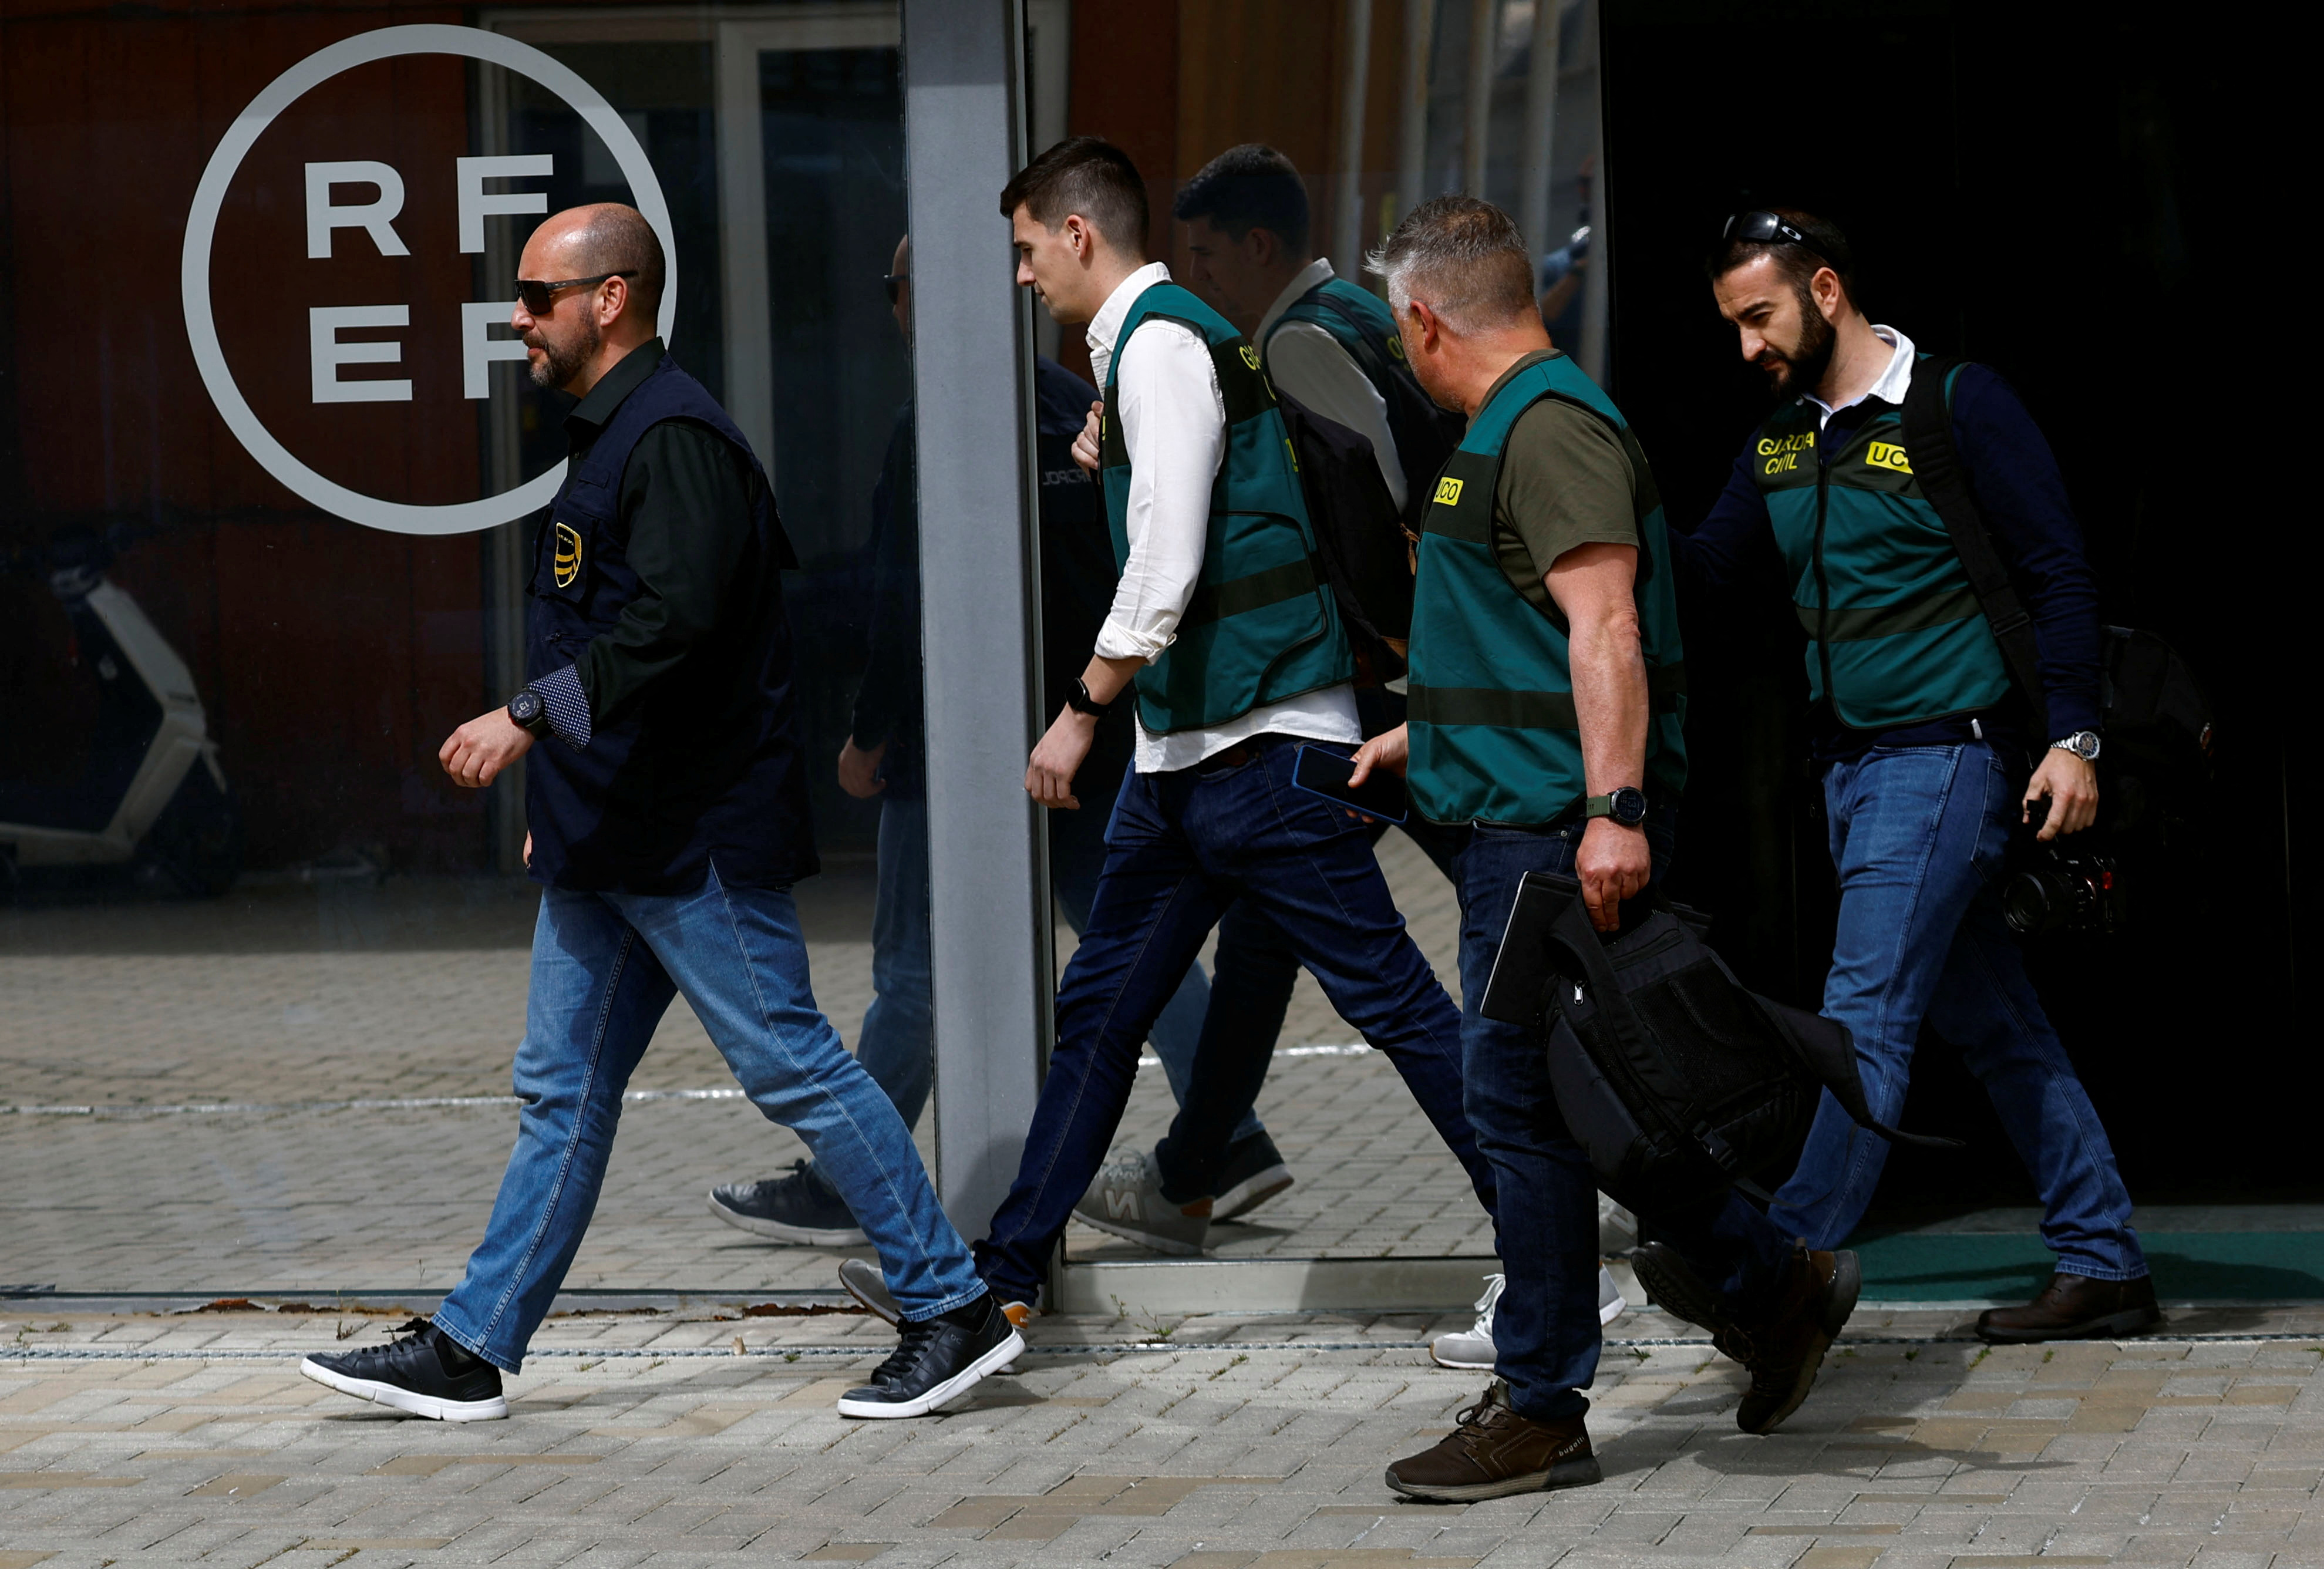 Spanish police search soccer federation headquarters as they search evidence in corruption probe, in Las Rozas